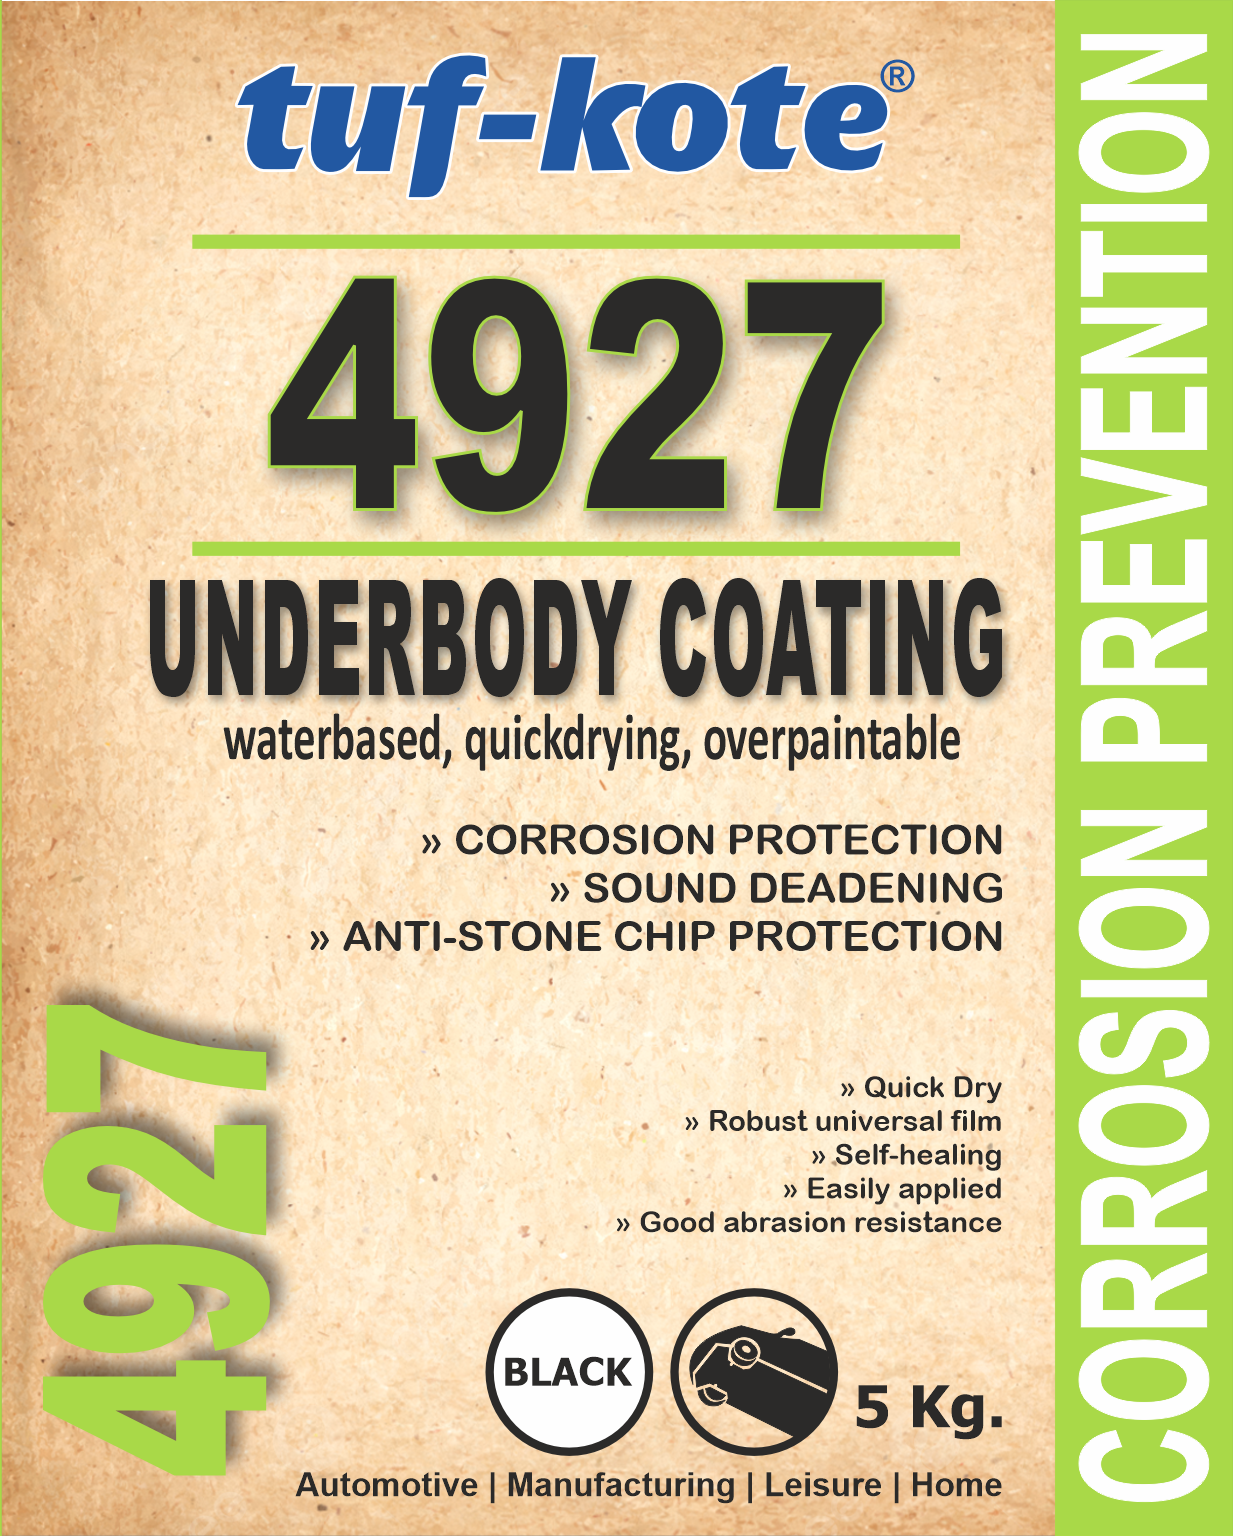 tuf-kote® 4927 WATERBASED Underbody Coating, Corrosion Prevention, Sound Deadening, Stone Chip Protection | BLACK